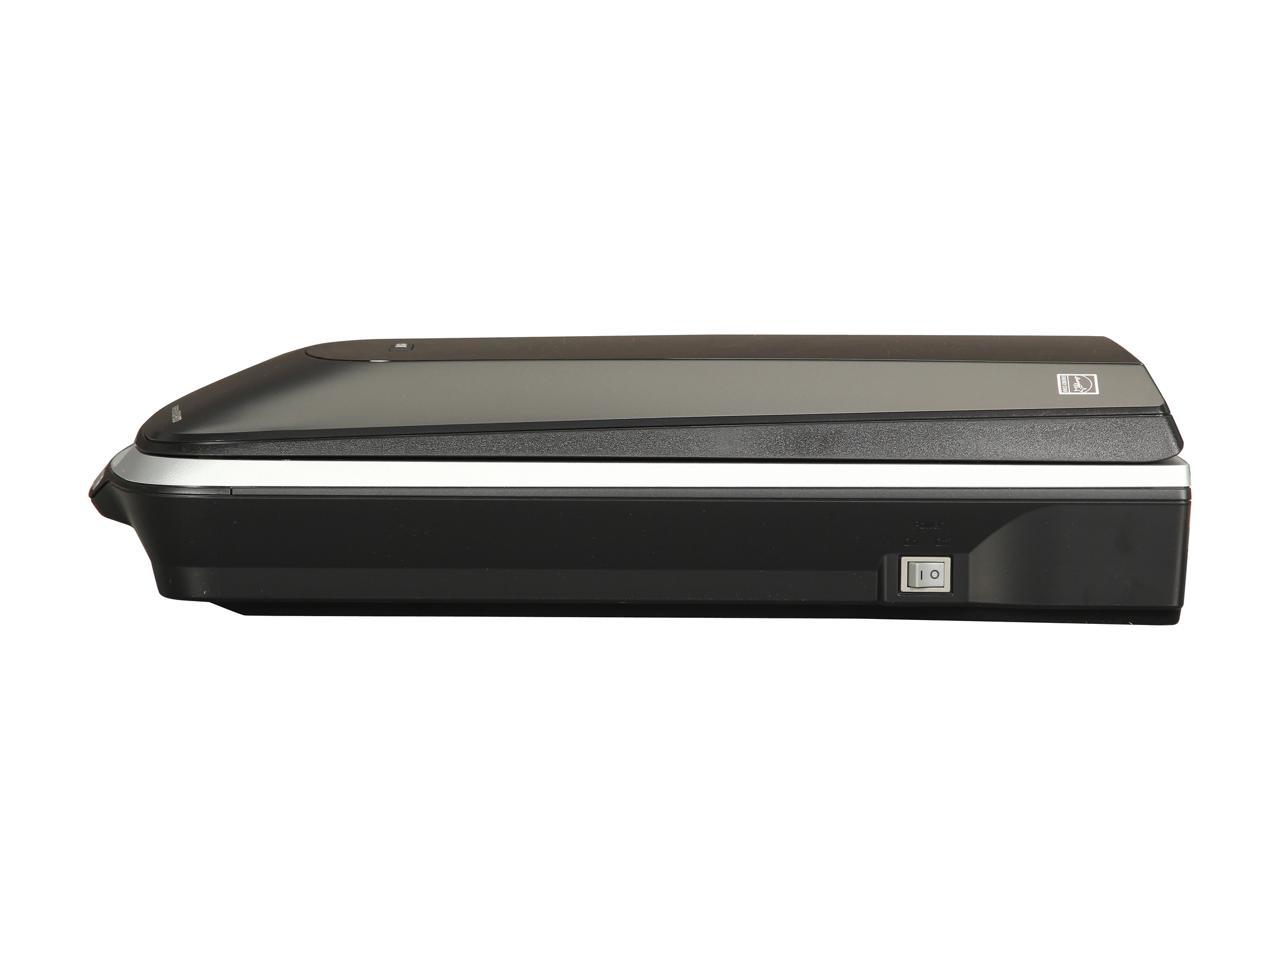 epson perfection v500 photo scanner not working